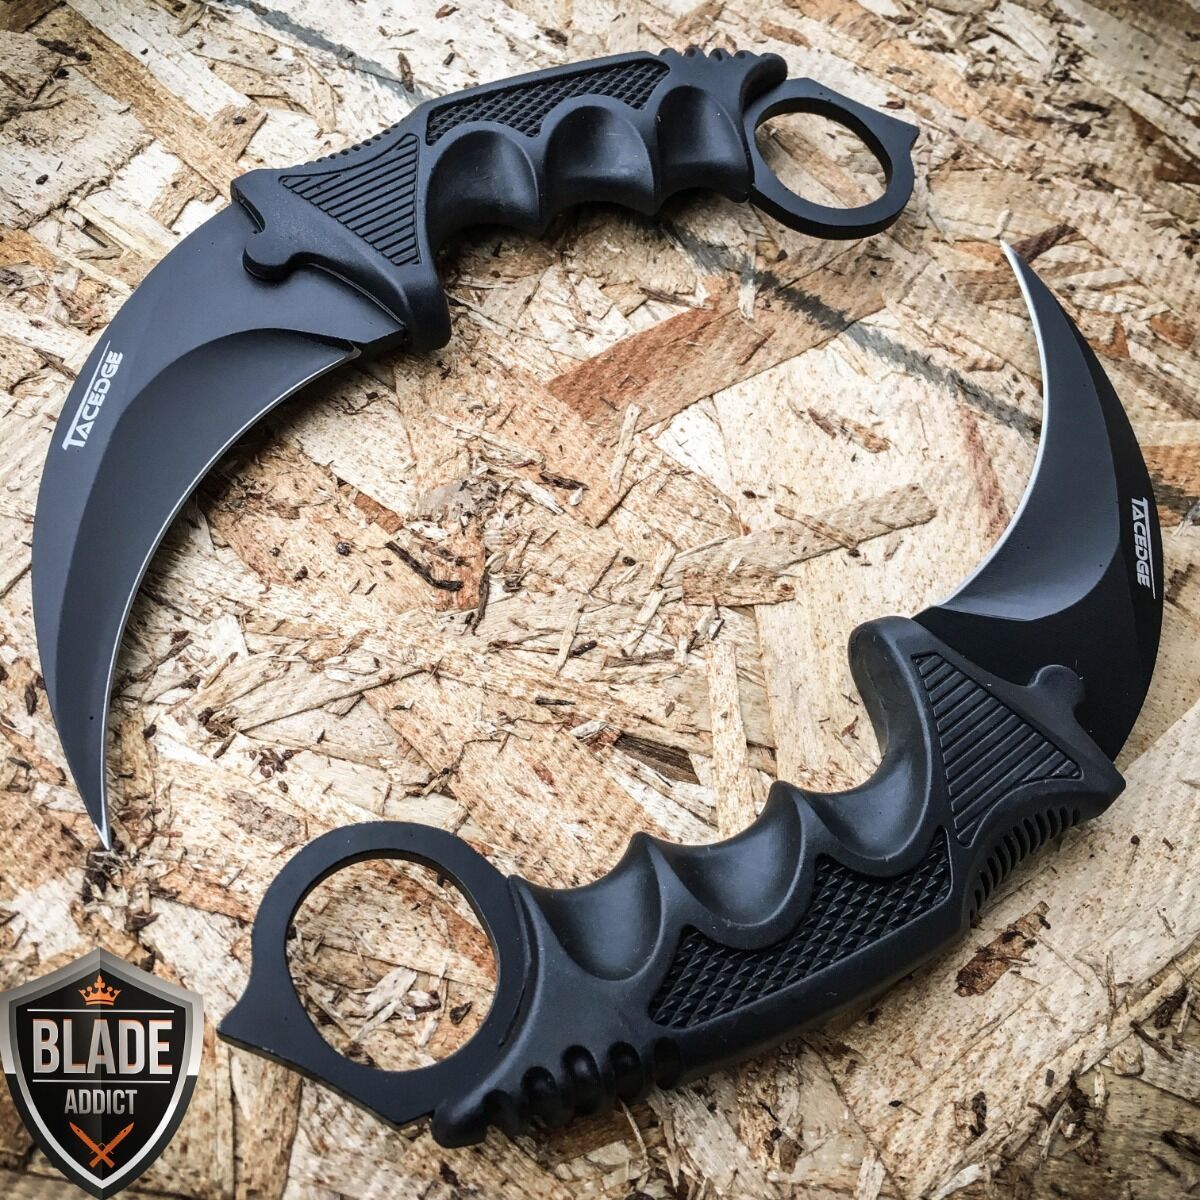 2 PC TACTICAL COMBAT KARAMBIT KNIFE Survival Hunting BOWIE Fixed Blade w/ SHEATH